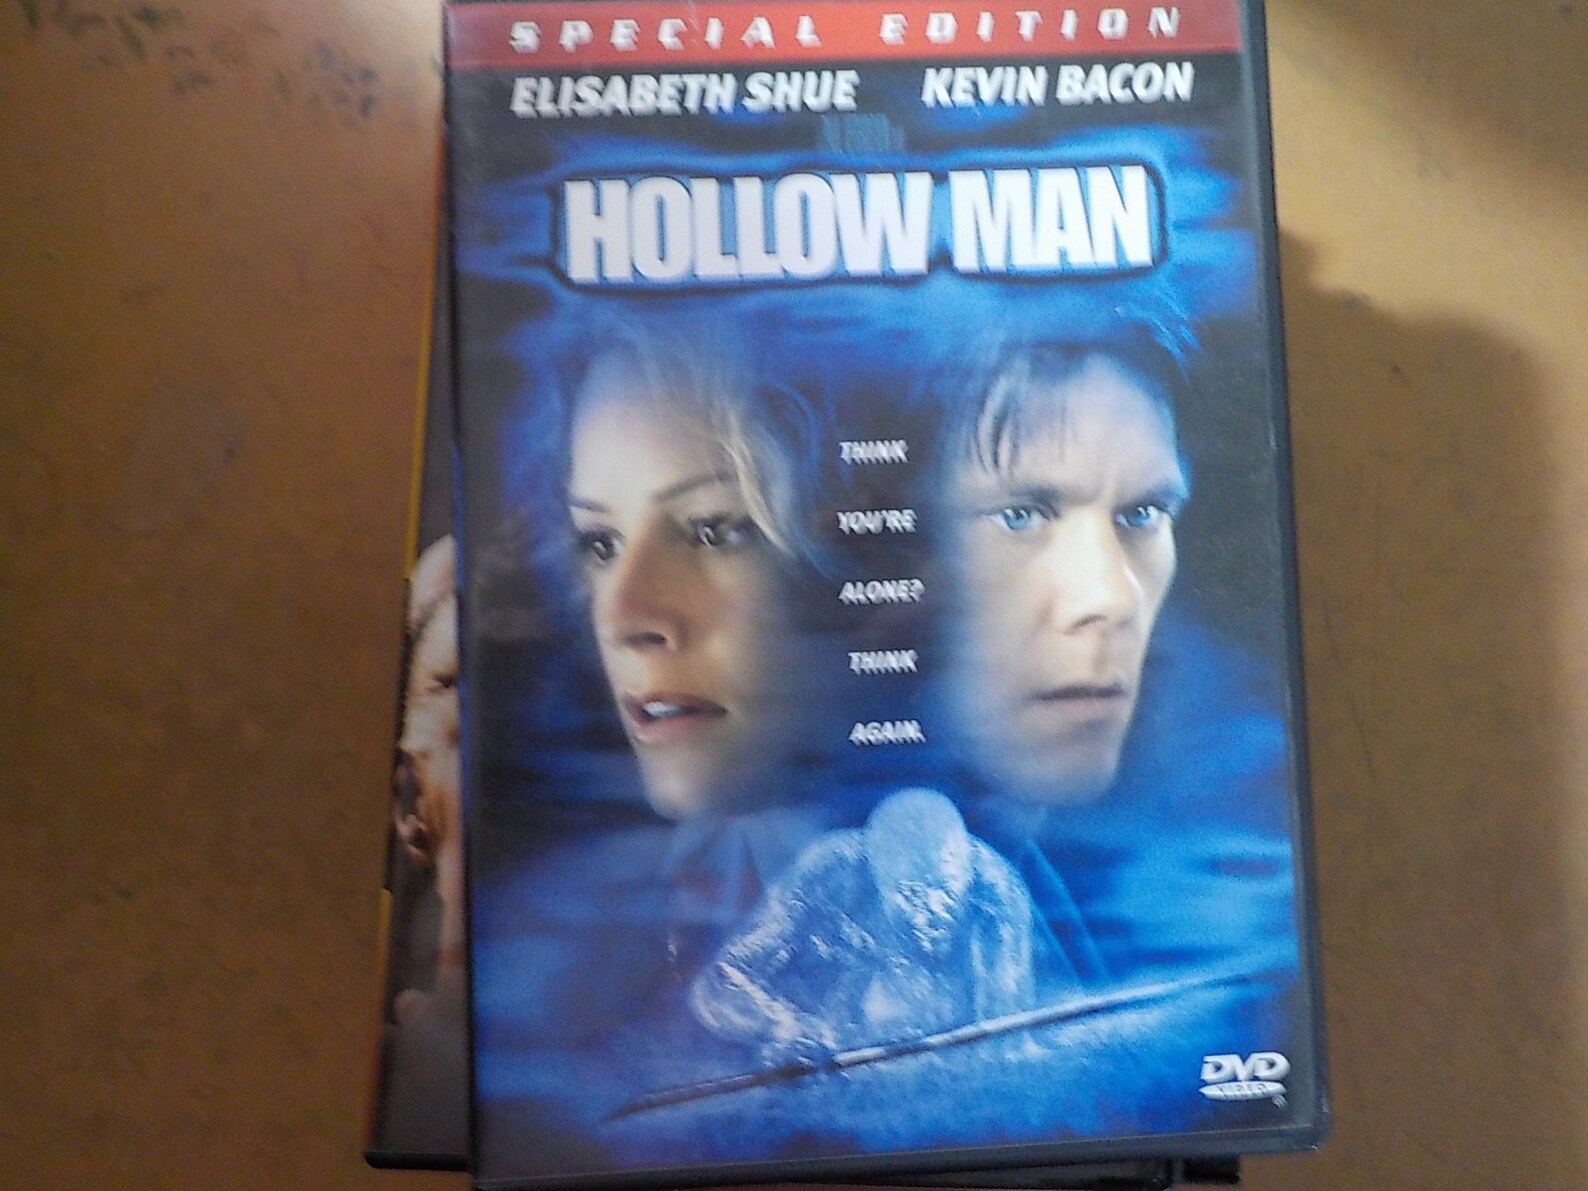 Hollow Man Elisabeth Shue Classic DVD Movie Show Rated R Free - Etsy UK